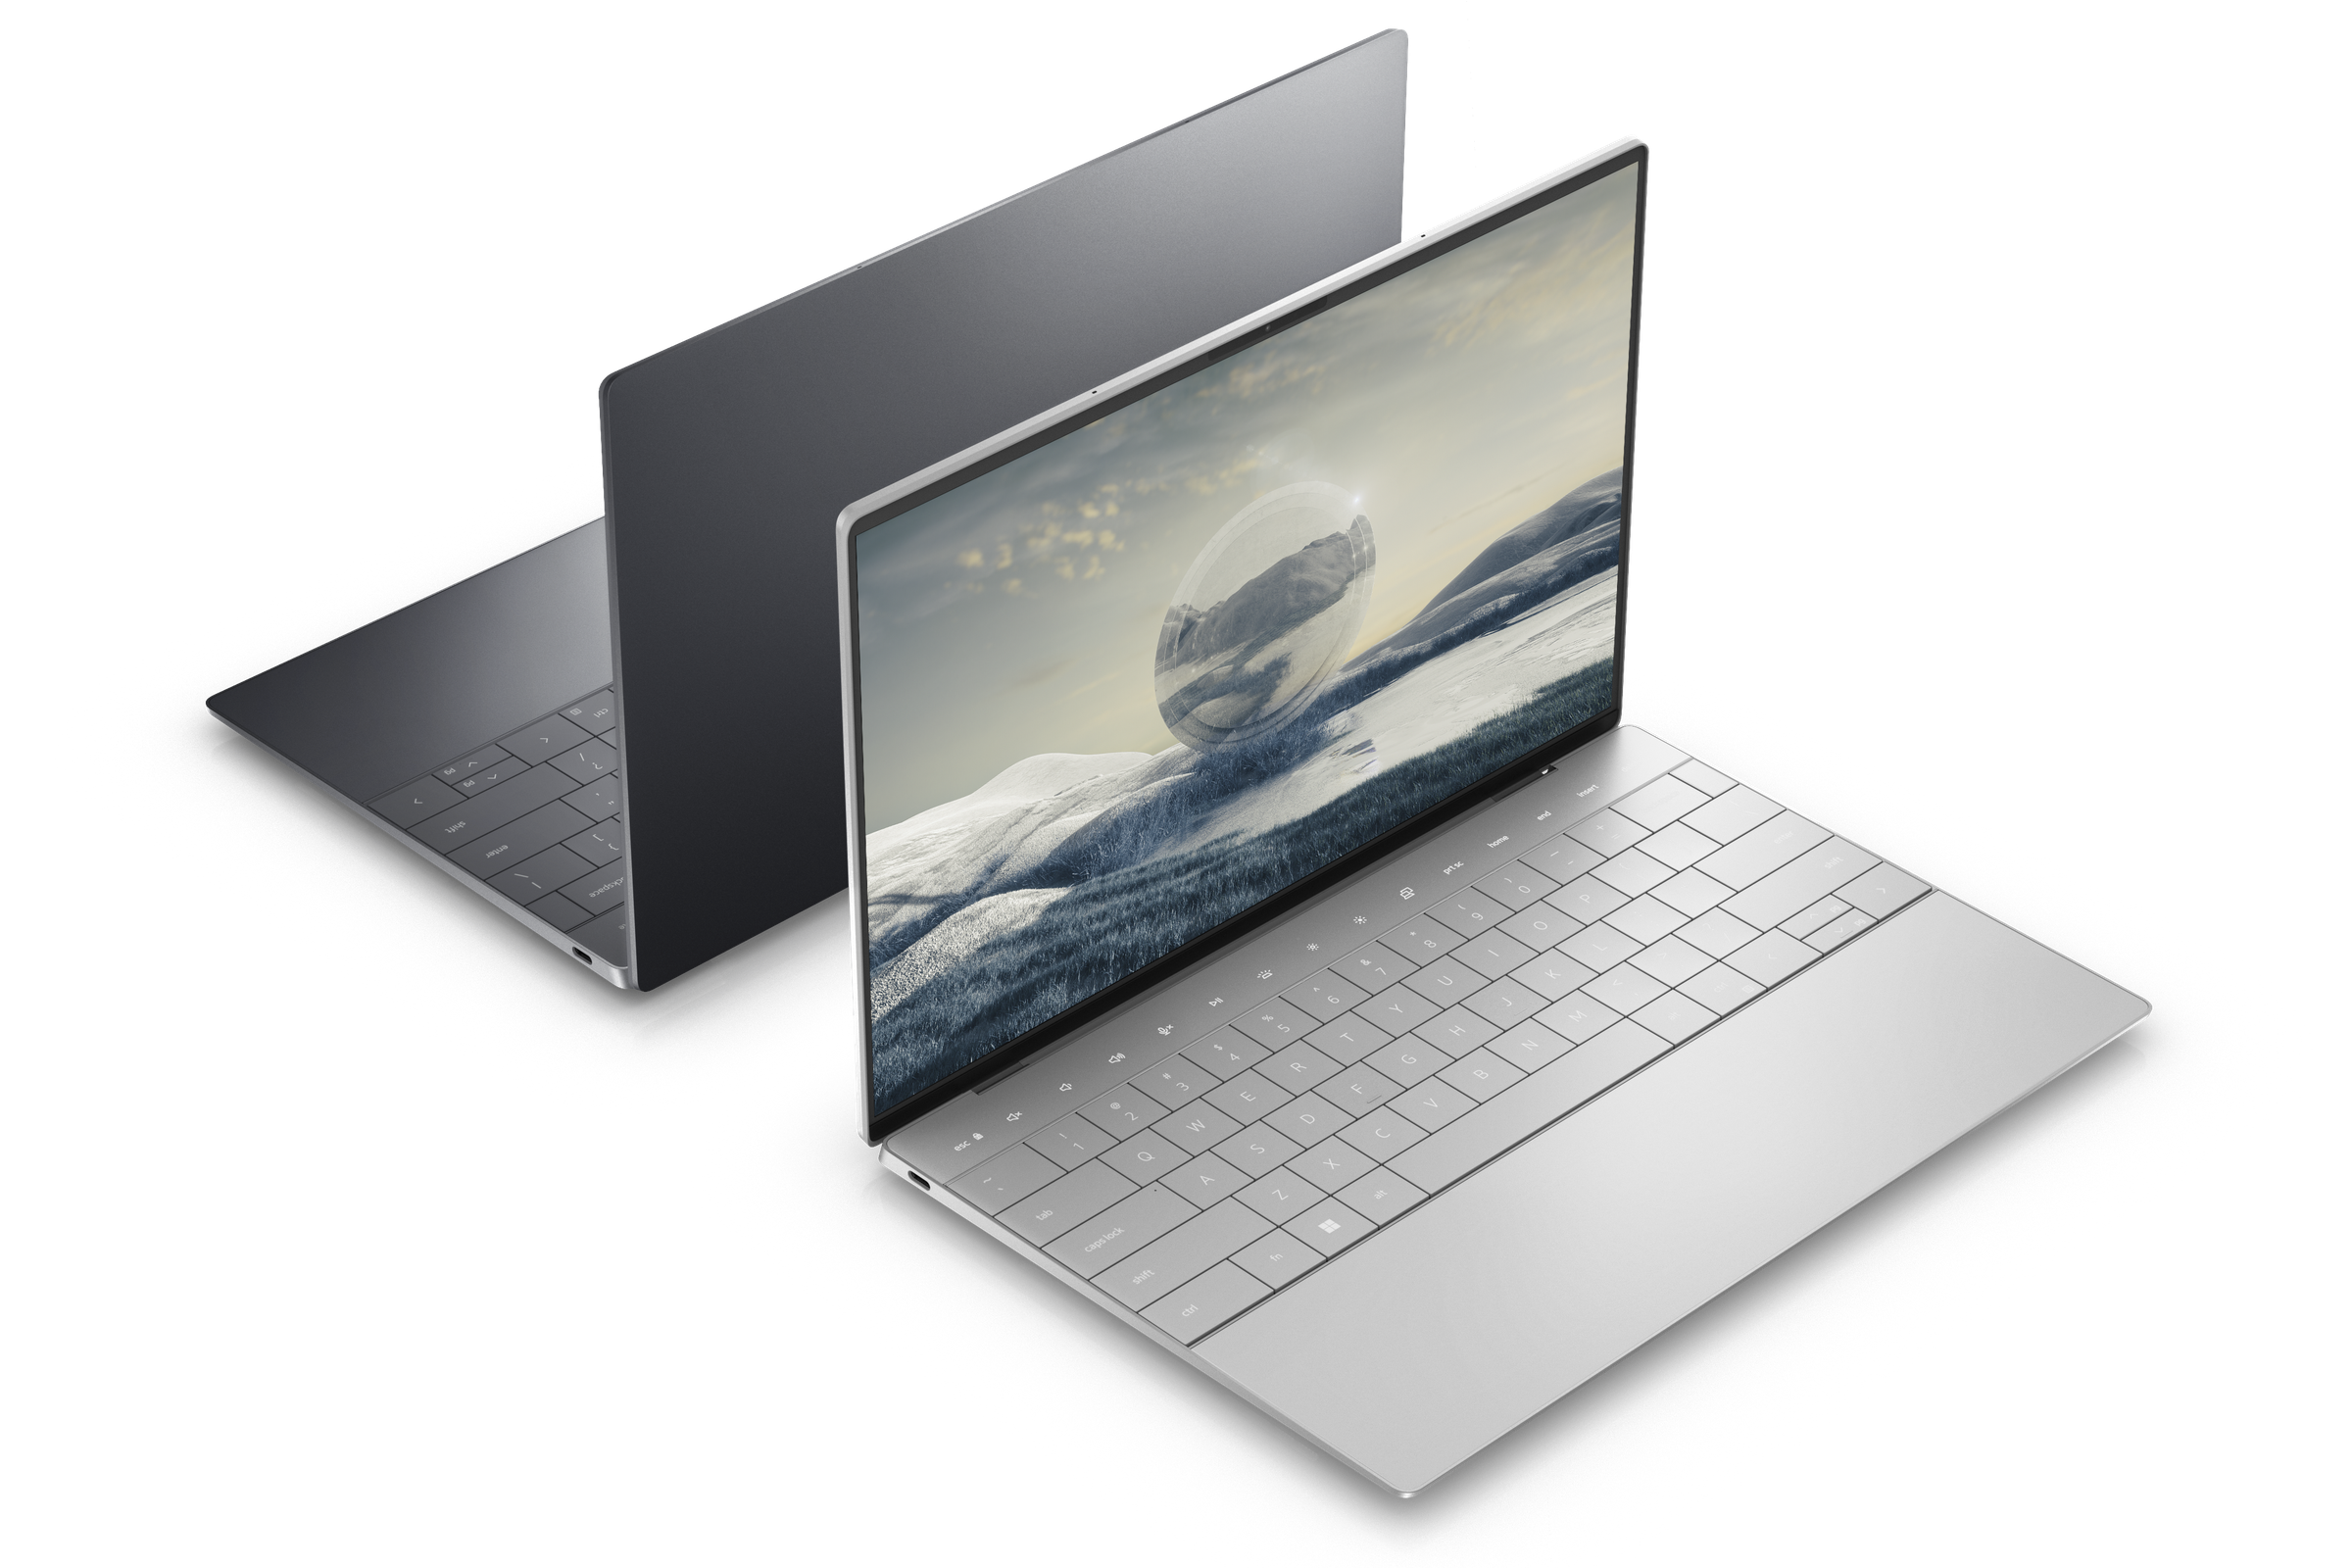 Two Dell XPS 13 Plus models open, displayed back to back on a white background. The front model, facing the camera, is platinum, displaying a mountainous desktop background. The back model is graphite.